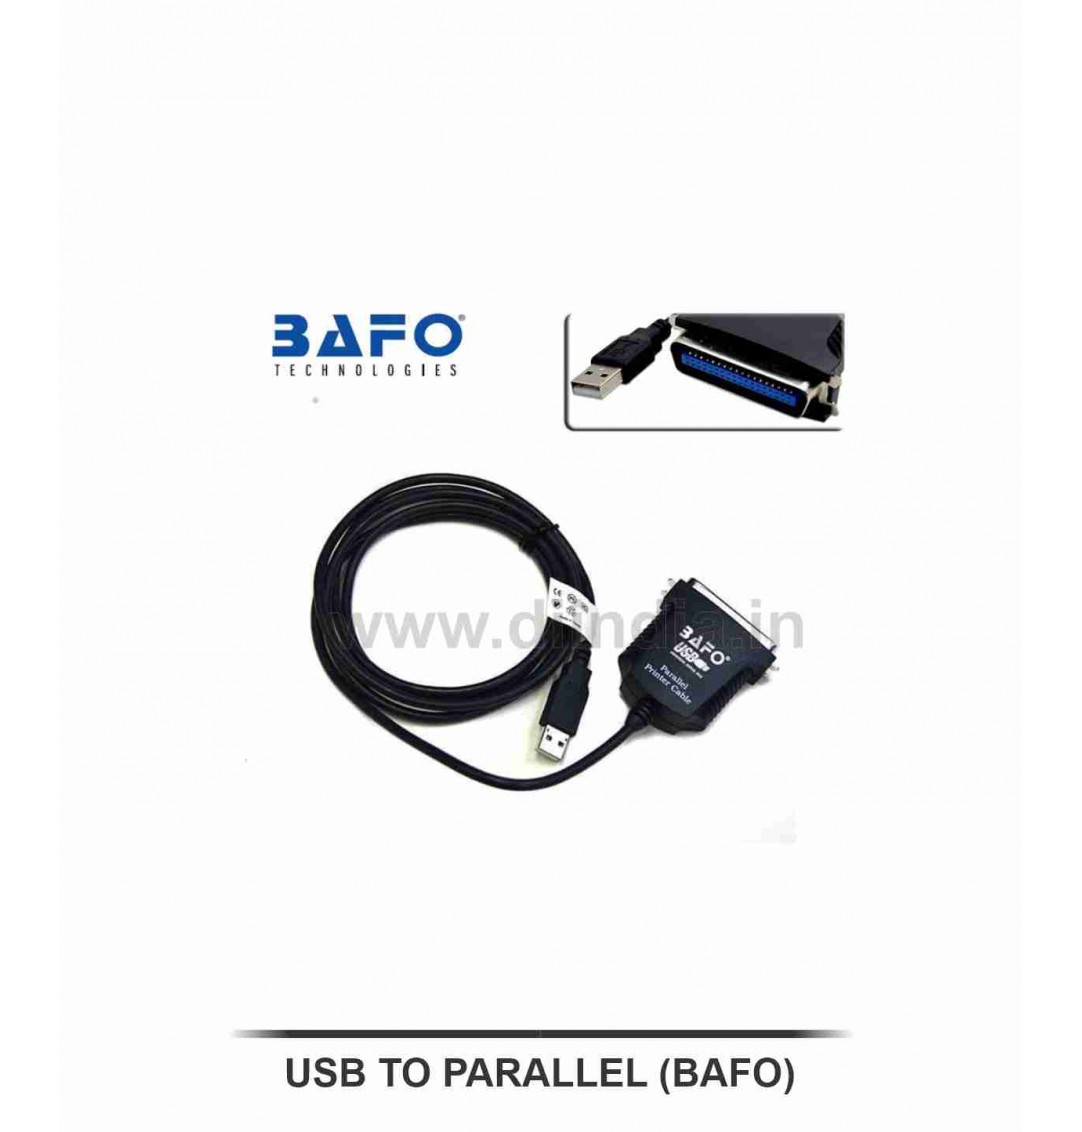 BAFO USB TO PARALLEL CABLE 36PIN (USB TO PARALLEL)